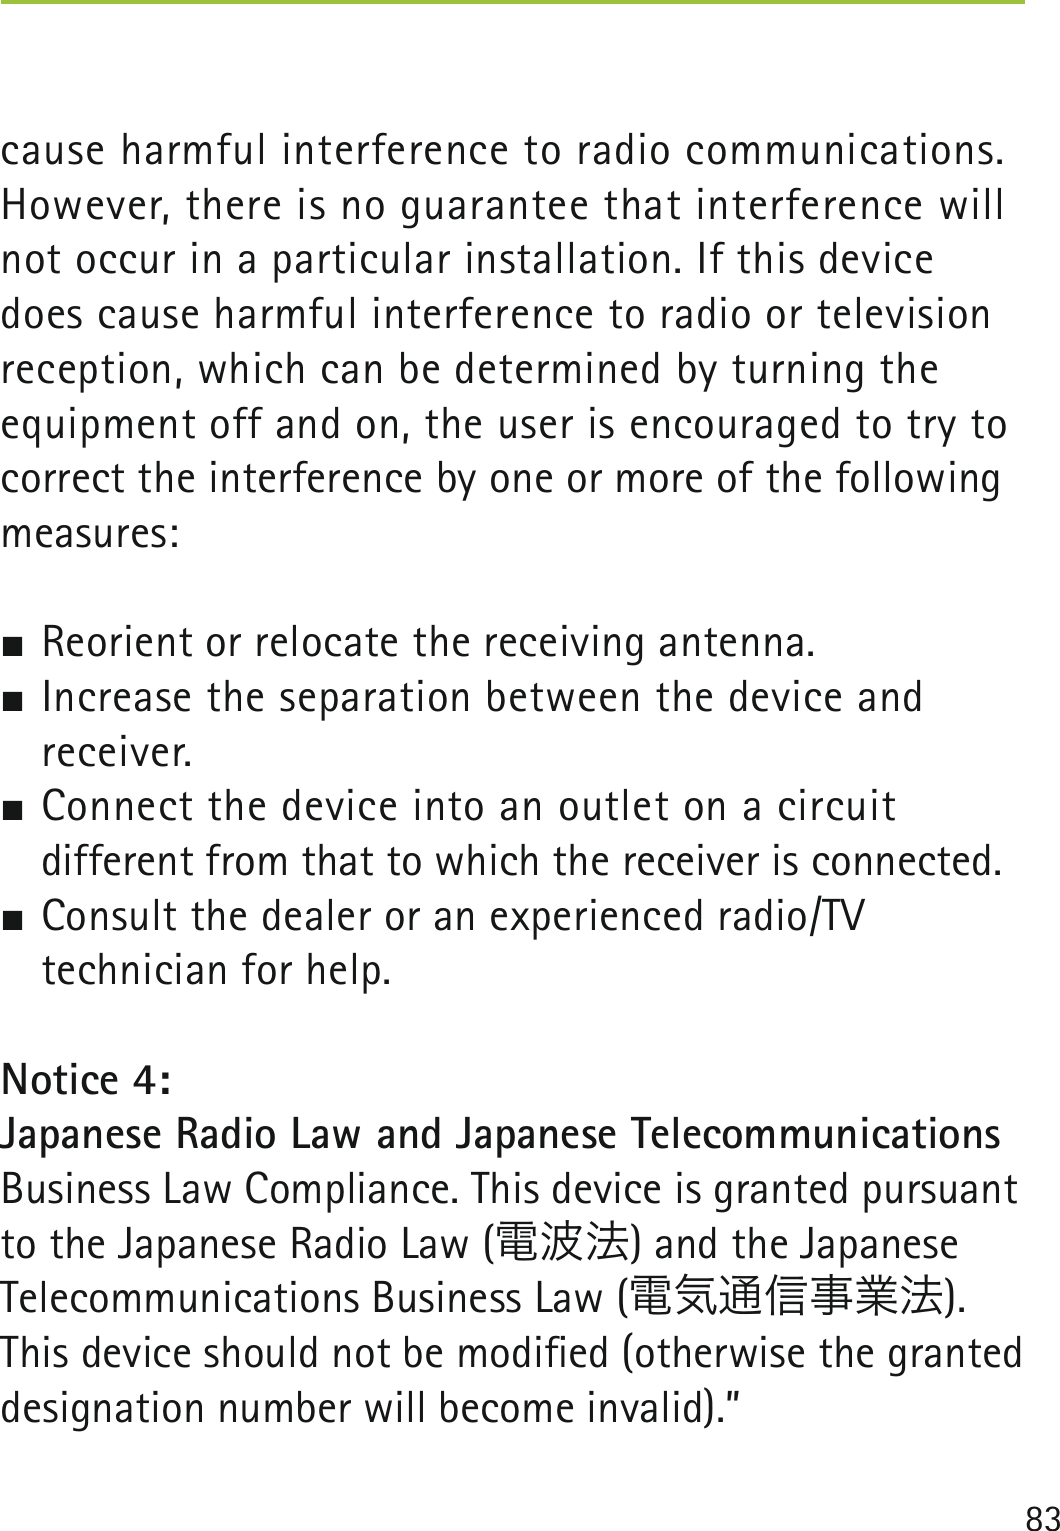 83cause harmful interference to radio communications. However, there is no guarantee that interference will not occur in a particular installation. If this device does cause harmful interference to radio or television reception, which can be determined by turning the equipment off and on, the user is encouraged to try to correct the interference by one or more of the following measures: Reorient or relocate the receiving antenna. Increase the separation between the device and  receiver.  Connect the device into an outlet on a circuit   different from that to which the receiver is connected. Consult the dealer or an experienced radio/TV   technician for help.Notice 4:Japanese Radio Law and Japanese Telecommunications Business Law Compliance. This device is granted pursuant to the Japanese Radio Law (電波法) and the Japanese Telecommunications Business Law (電気通信事業法).This device should not be modiﬁed (otherwise the granted designation number will become invalid).”  